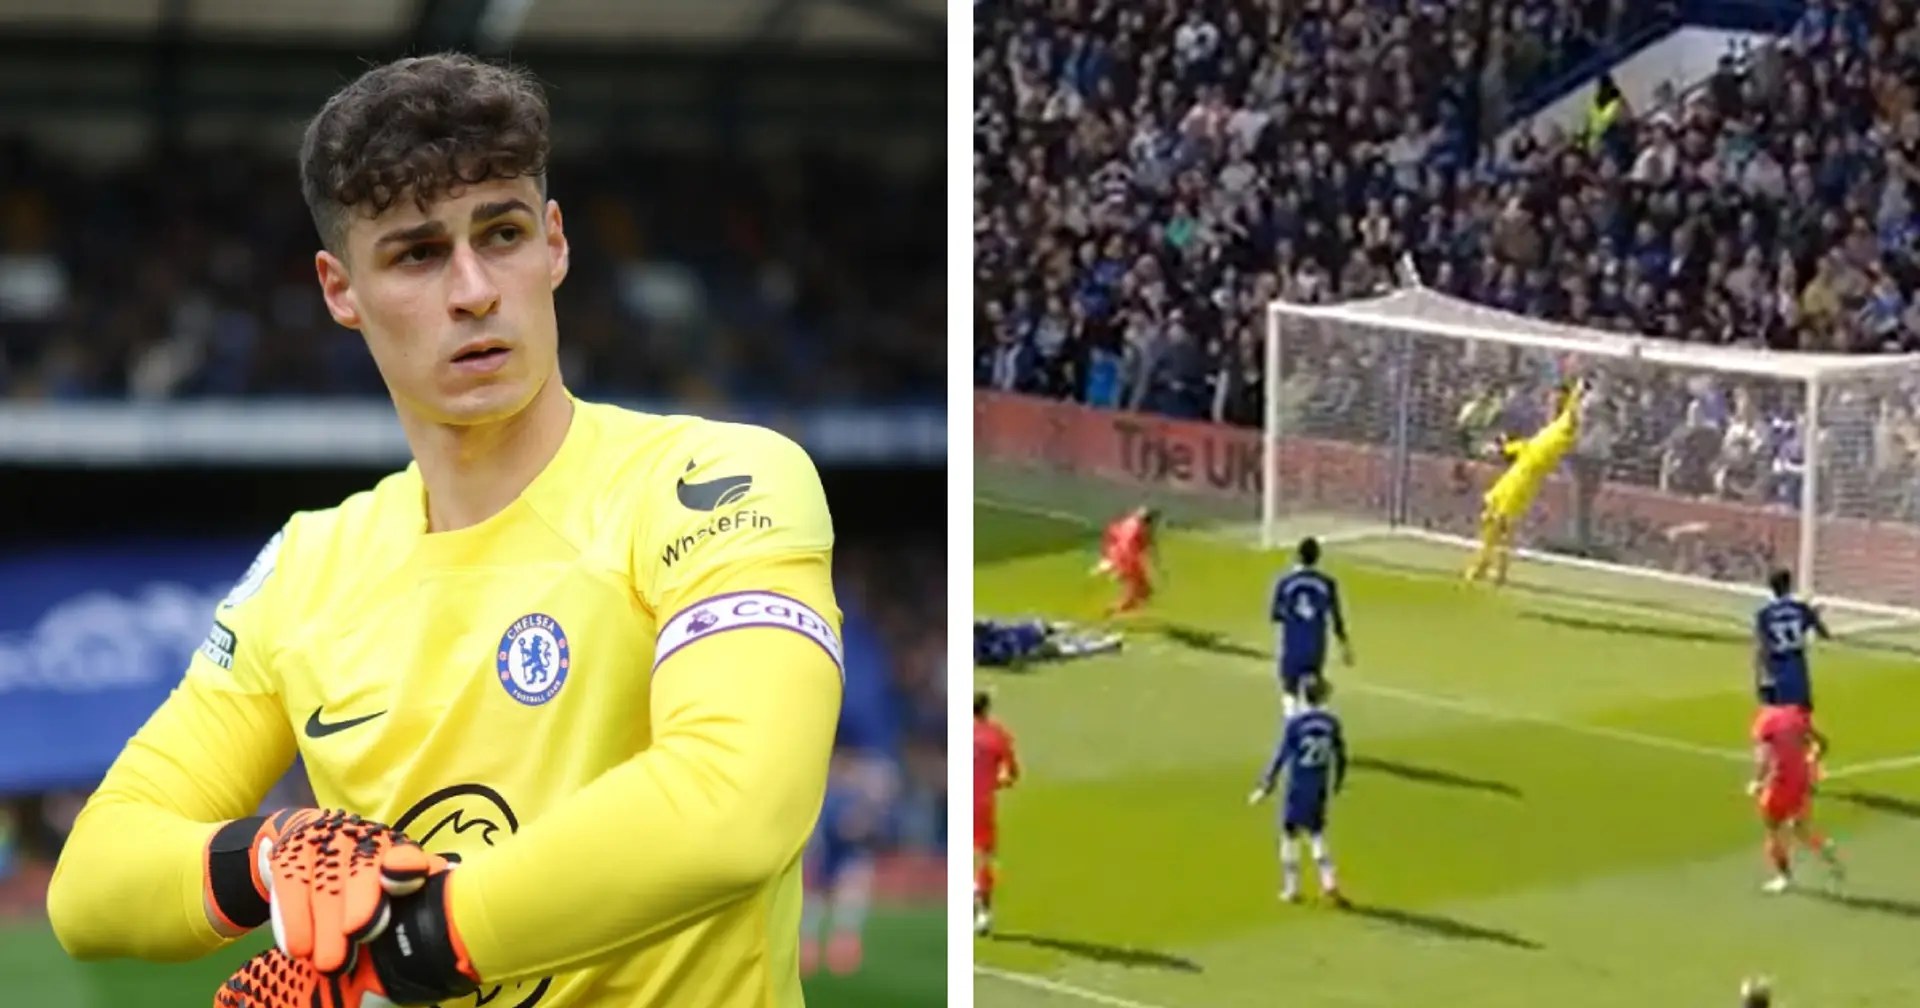 Kepa Arrizabalaga is up for Premier League Save of the Month award for April (video)